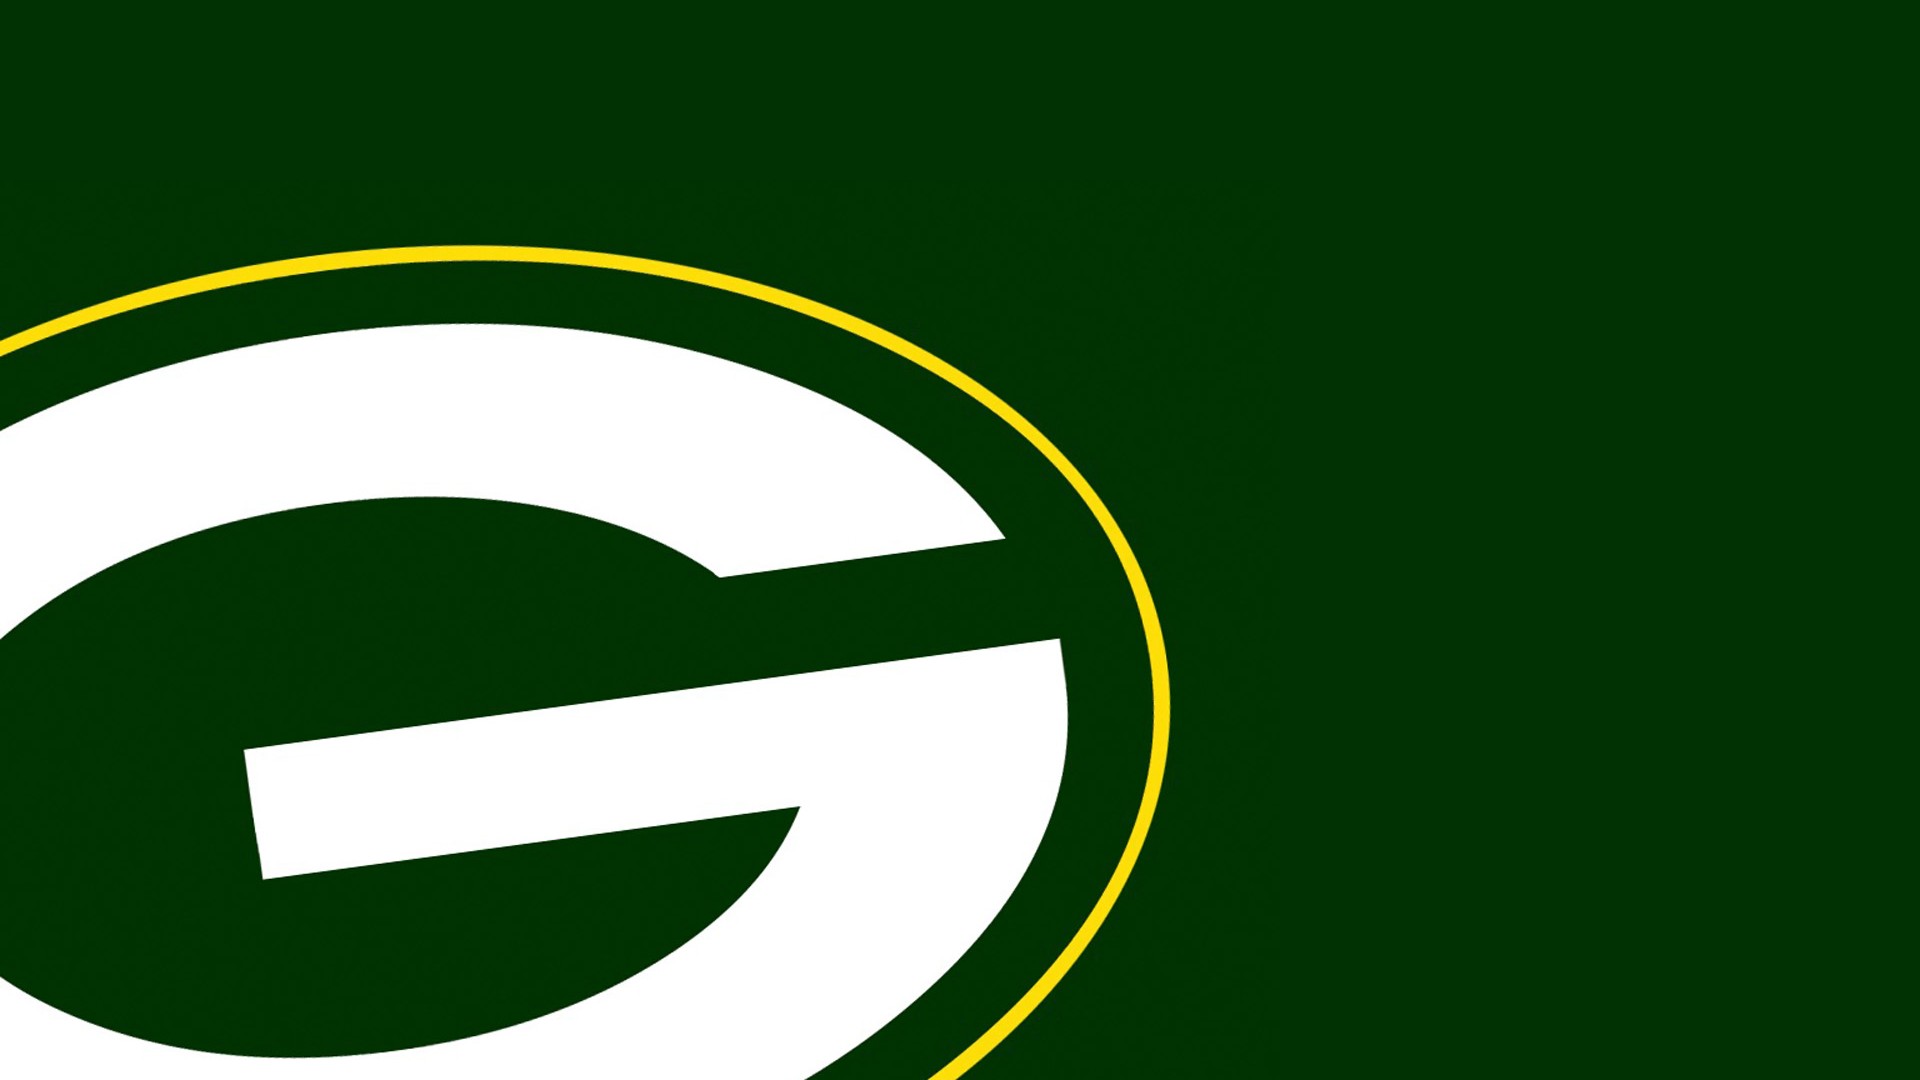 Wallpaper Desktop Green Bay Packers NFL HD With Resolution 1920X1080 pixel. You can make this wallpaper for your Mac or Windows Desktop Background, iPhone, Android or Tablet and another Smartphone device for free